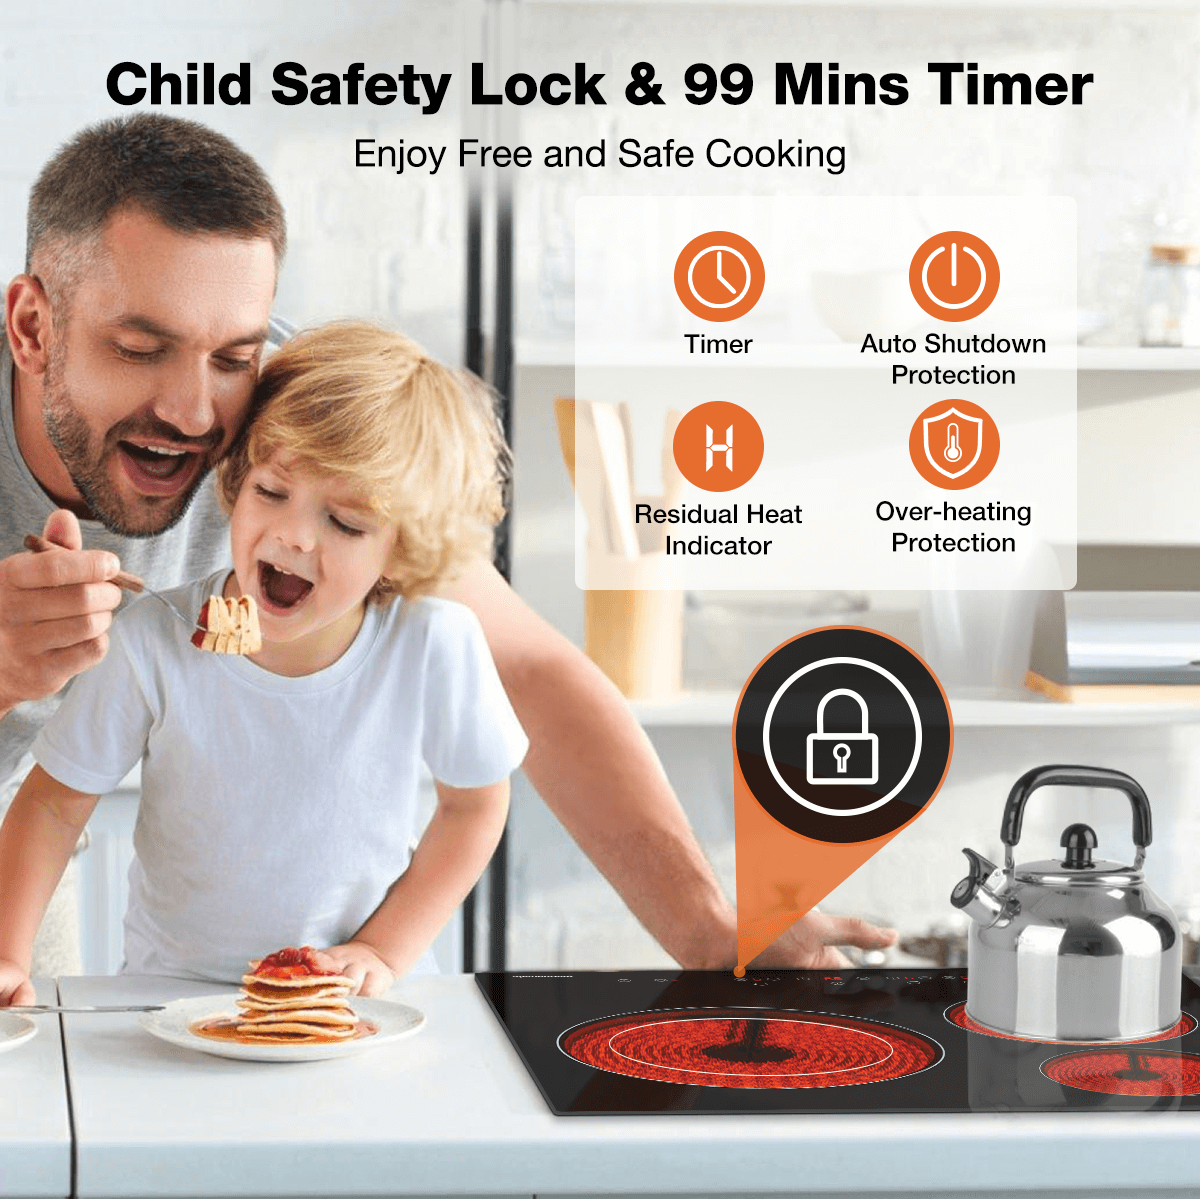 Child Safety Lock & 99 Mins Timer | Thermomate